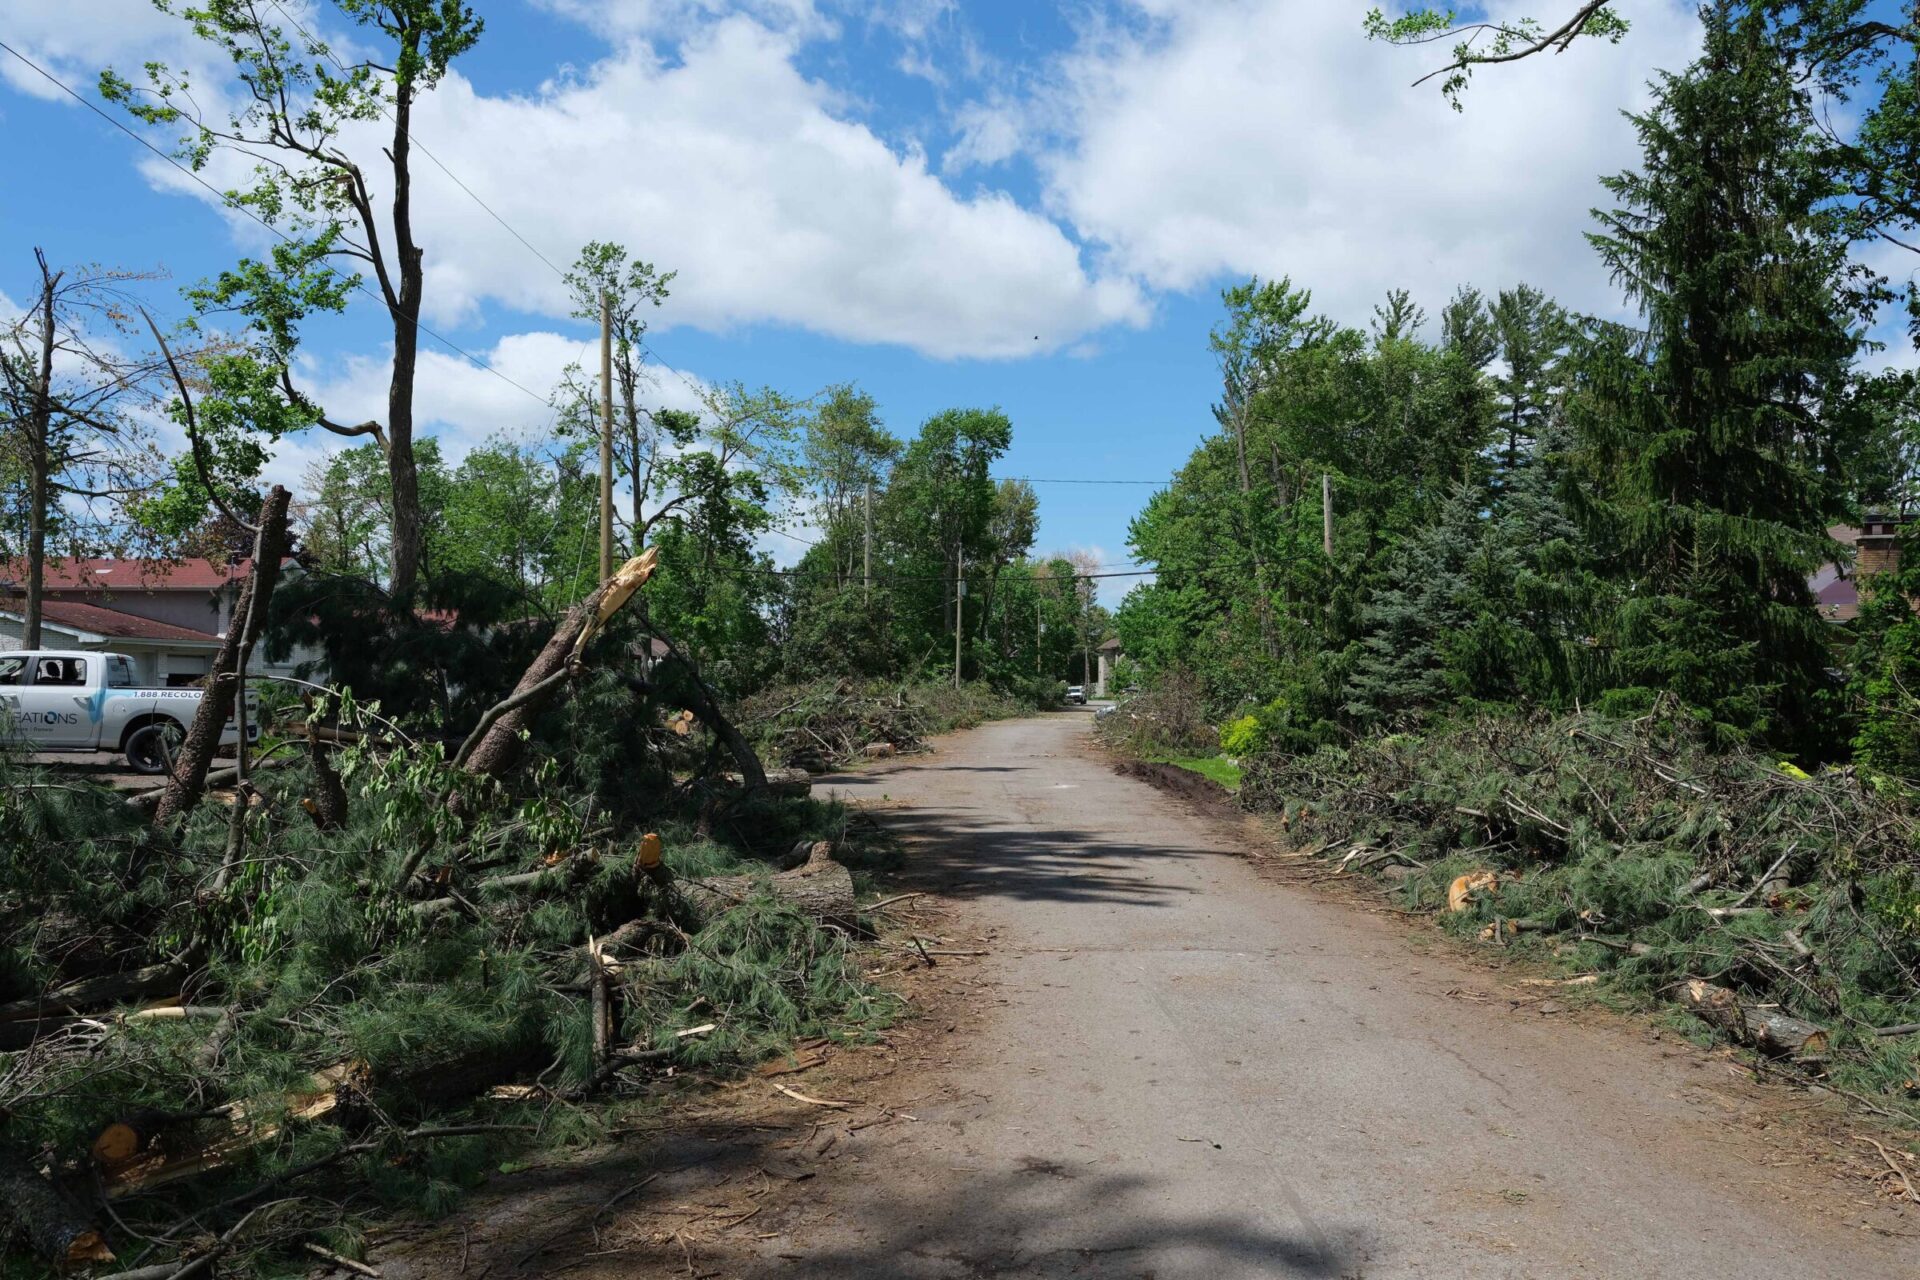 A road lined with debris and fallen trees after a severe storm, with a vehicle on the left and clear skies above.